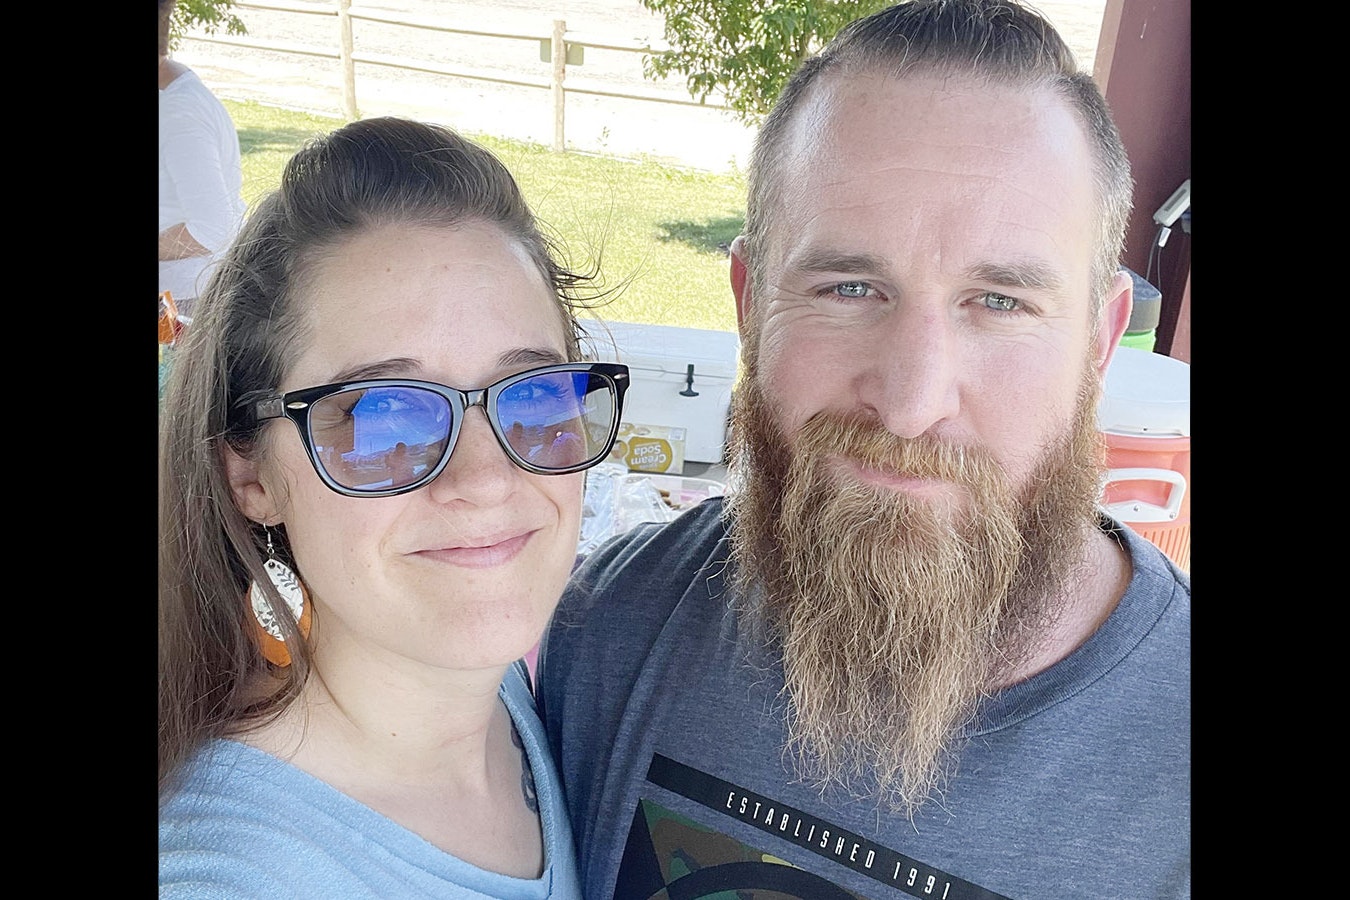 Ashley and Sean Willey are parents of a Rock Springs high school student who they say has been gender transitioned by the local school district behind their backs.